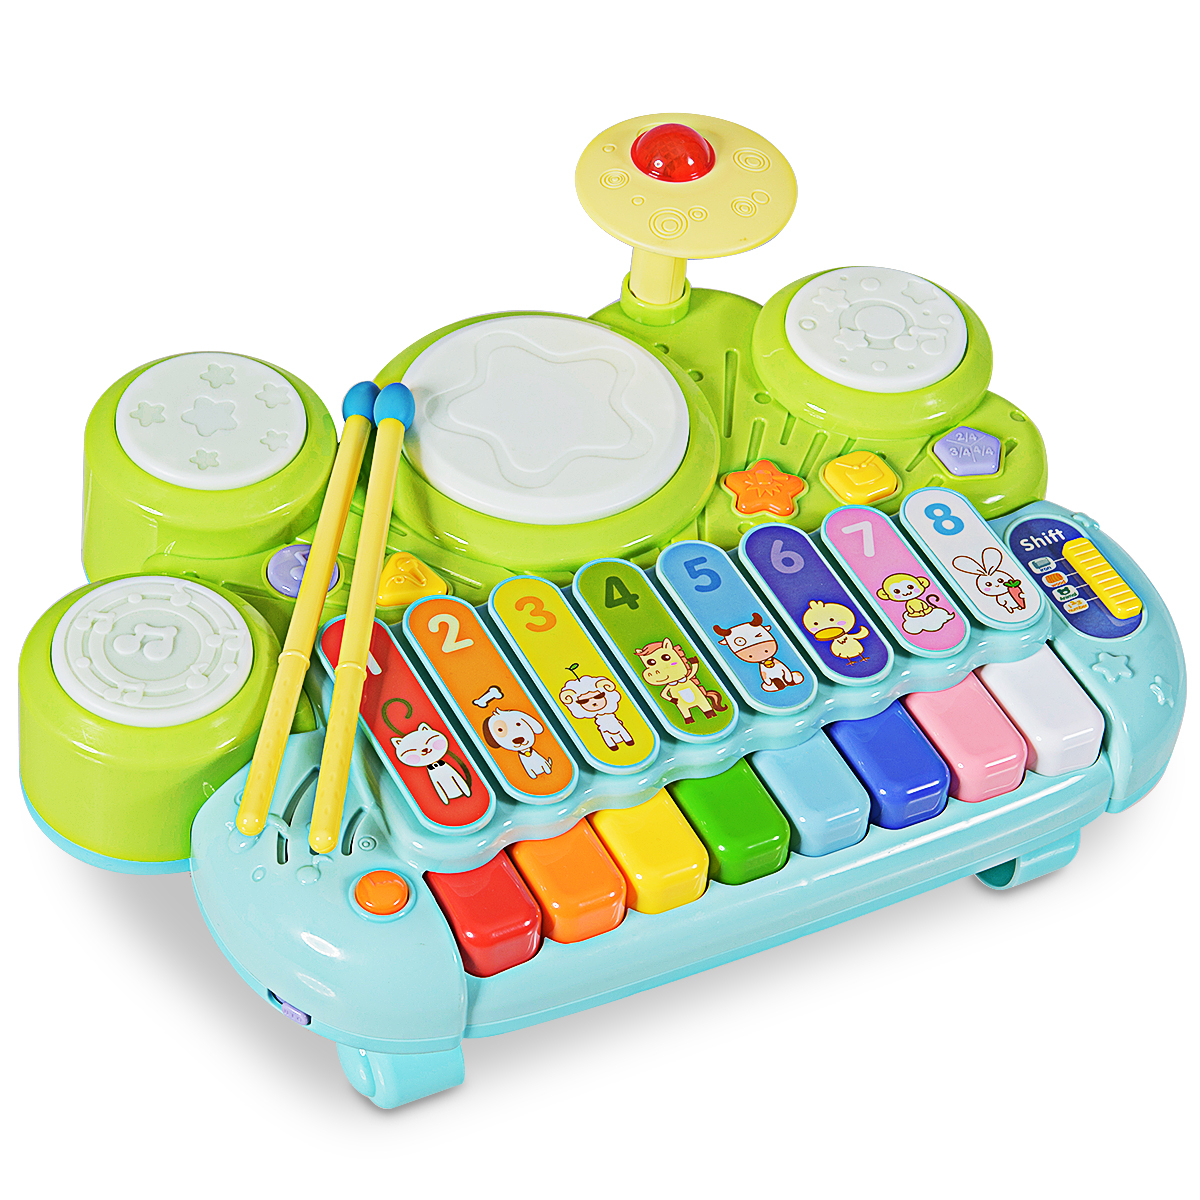 3-in-1 Drum Xylophone Piano Keyboard Set Electronic Musical Instrument Toy